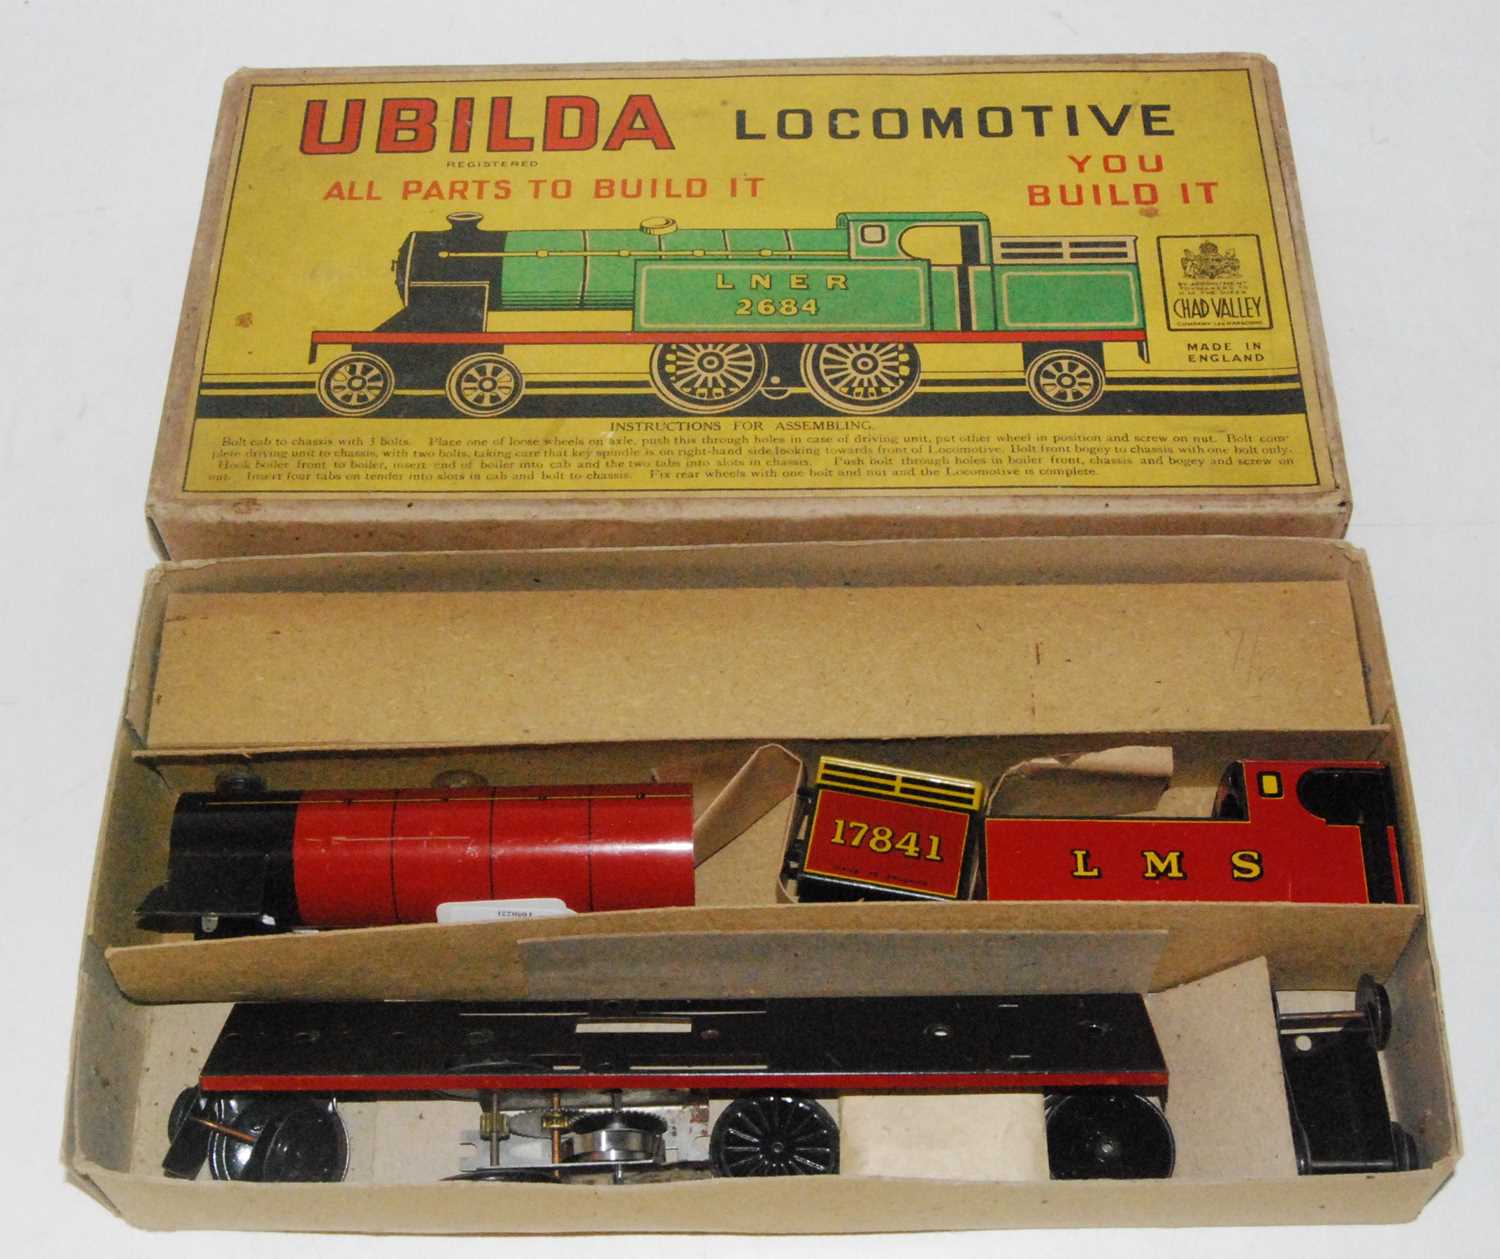 A Chad Valley Ubilda locomotive housed in the original labelled card box, appears complete with